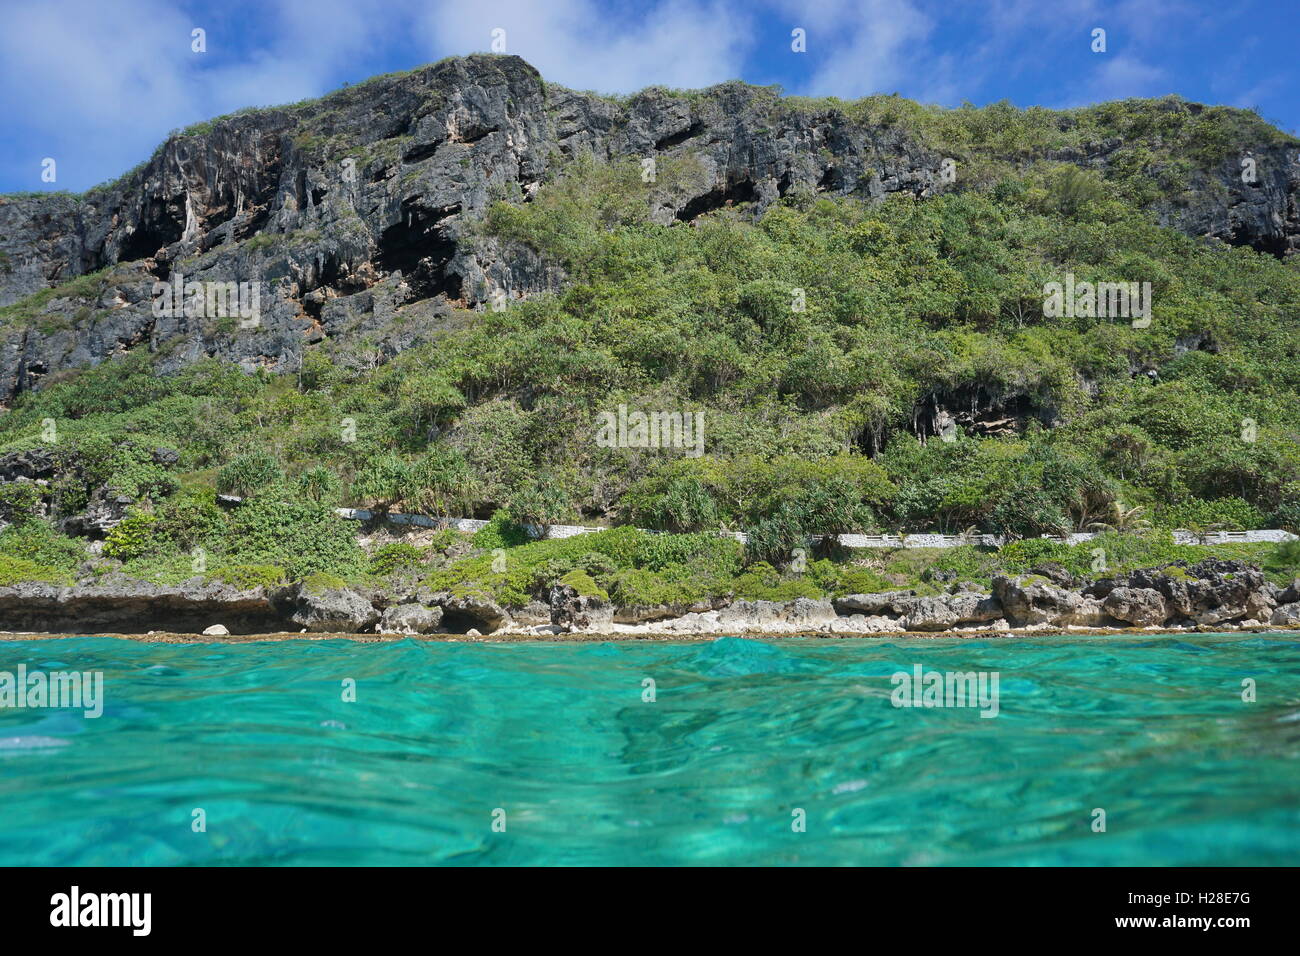 Coastal landscape, eroded limestone cliff with vegetation seen from water surface, Pacific ocean, Rurutu island Stock Photo